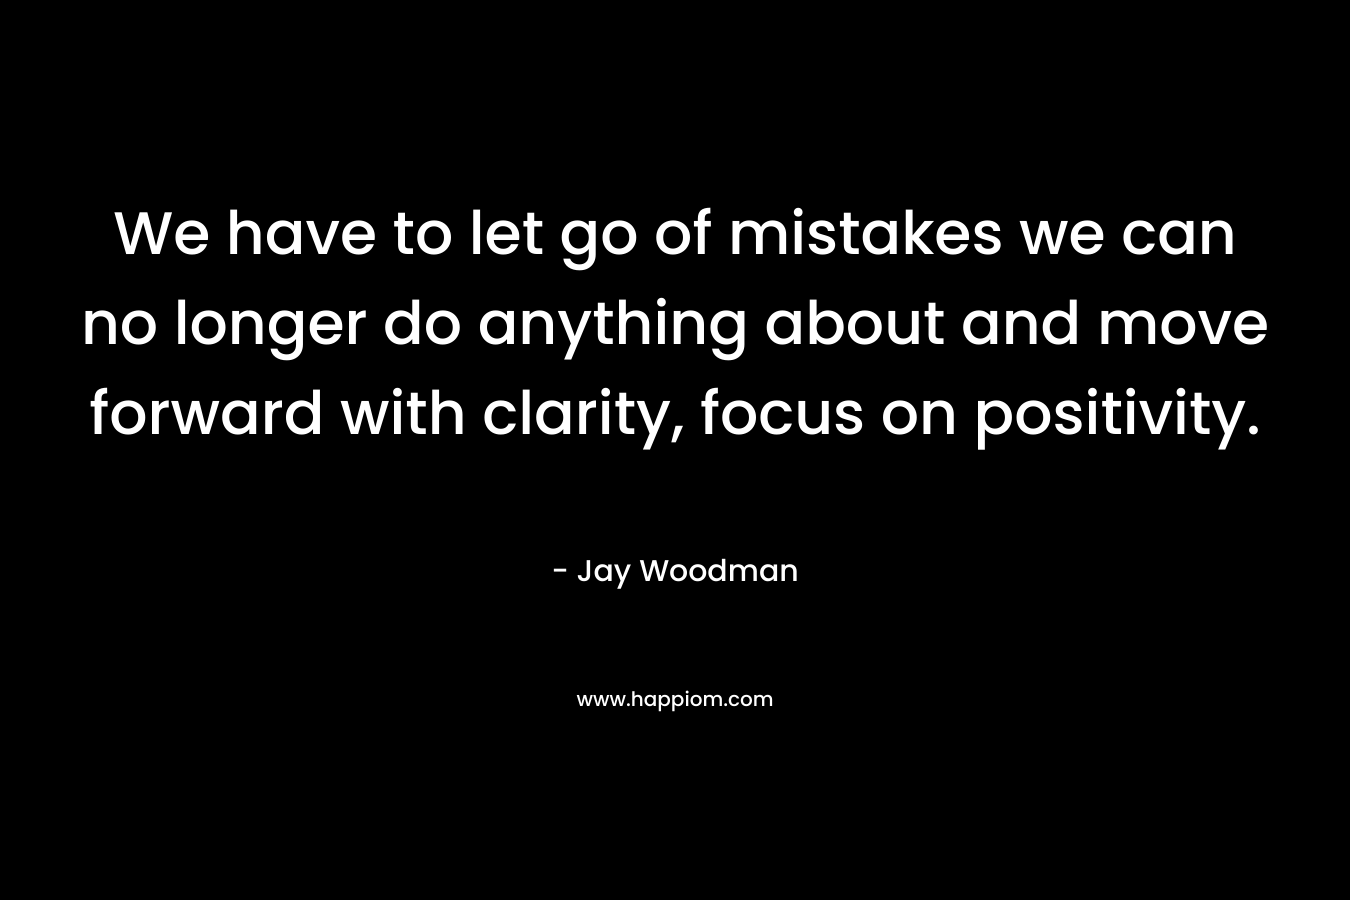 We have to let go of mistakes we can no longer do anything about and move forward with clarity, focus on positivity. – Jay Woodman